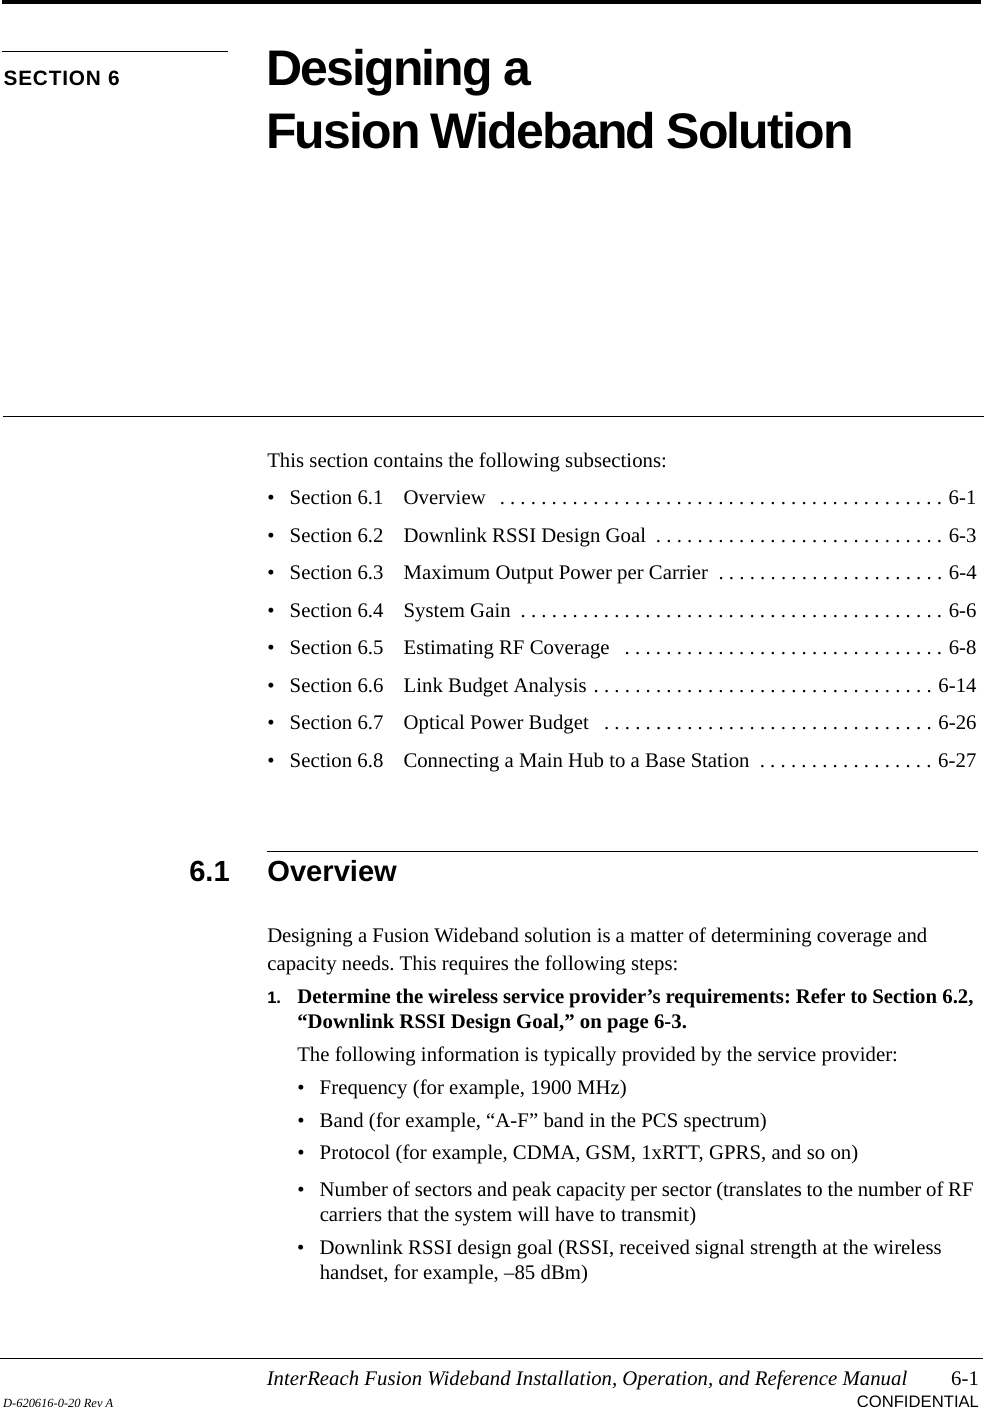 InterReach Fusion Wideband Installation, Operation, and Reference Manual 6-1D-620616-0-20 Rev A CONFIDENTIALSECTION 6 Designing a Fusion Wideband SolutionThis section contains the following subsections:• Section 6.1   Overview   . . . . . . . . . . . . . . . . . . . . . . . . . . . . . . . . . . . . . . . . . . . 6-1• Section 6.2   Downlink RSSI Design Goal  . . . . . . . . . . . . . . . . . . . . . . . . . . . . 6-3• Section 6.3   Maximum Output Power per Carrier  . . . . . . . . . . . . . . . . . . . . . . 6-4• Section 6.4   System Gain  . . . . . . . . . . . . . . . . . . . . . . . . . . . . . . . . . . . . . . . . . 6-6• Section 6.5   Estimating RF Coverage   . . . . . . . . . . . . . . . . . . . . . . . . . . . . . . . 6-8• Section 6.6   Link Budget Analysis . . . . . . . . . . . . . . . . . . . . . . . . . . . . . . . . . 6-14• Section 6.7   Optical Power Budget   . . . . . . . . . . . . . . . . . . . . . . . . . . . . . . . . 6-26• Section 6.8   Connecting a Main Hub to a Base Station  . . . . . . . . . . . . . . . . . 6-276.1 OverviewDesigning a Fusion Wideband solution is a matter of determining coverage and capacity needs. This requires the following steps:1. Determine the wireless service provider’s requirements: Refer to Section 6.2, “Downlink RSSI Design Goal,” on page 6-3.The following information is typically provided by the service provider:• Frequency (for example, 1900 MHz)• Band (for example, “A-F” band in the PCS spectrum)• Protocol (for example, CDMA, GSM, 1xRTT, GPRS, and so on)• Number of sectors and peak capacity per sector (translates to the number of RF carriers that the system will have to transmit)• Downlink RSSI design goal (RSSI, received signal strength at the wireless handset, for example, –85 dBm)